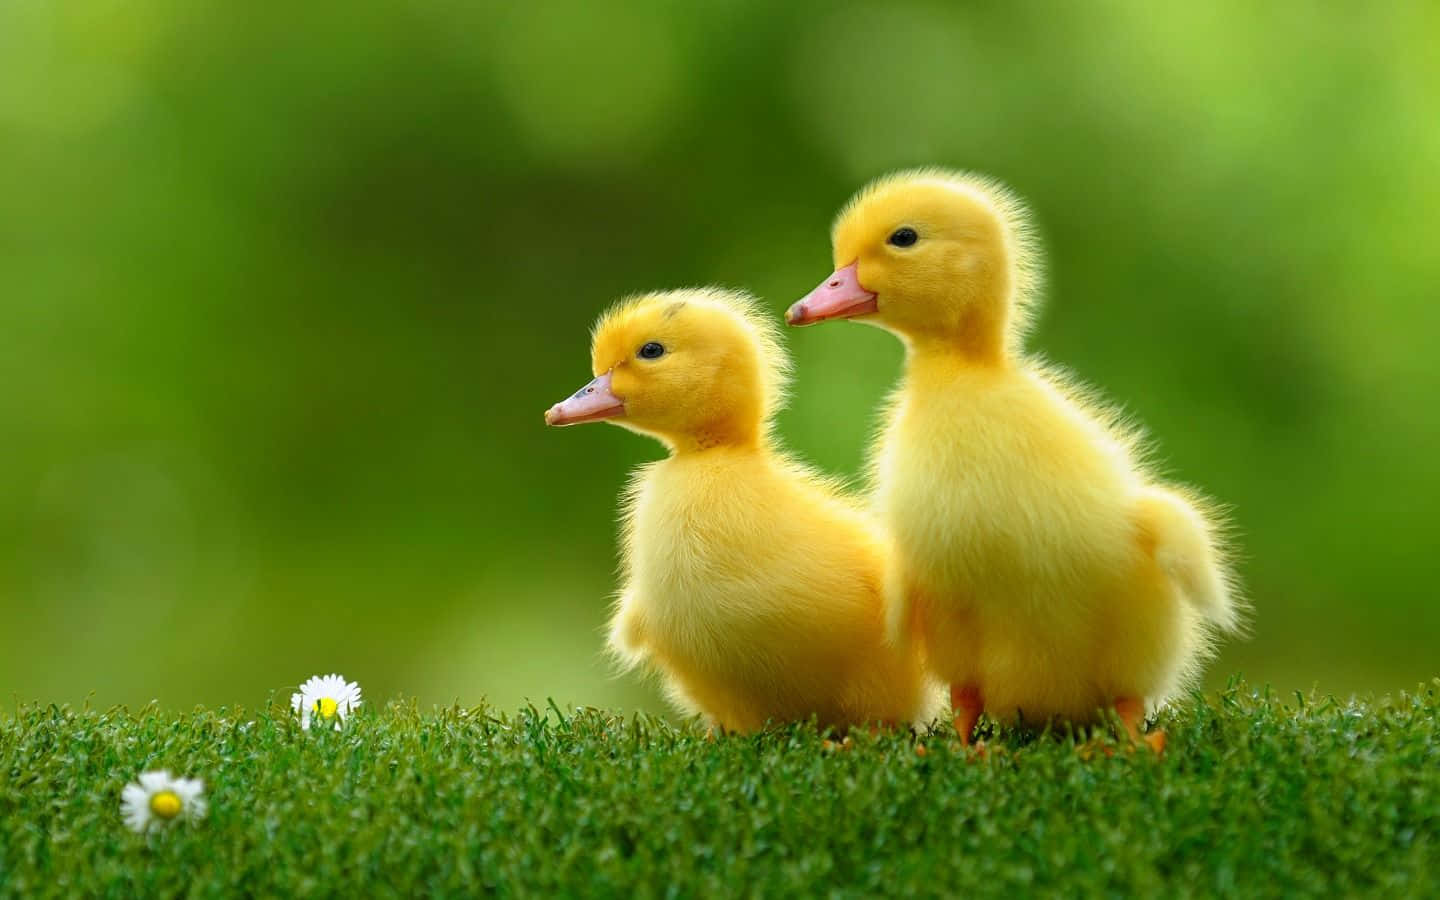 Look At This Adorable Cute Duck! Background